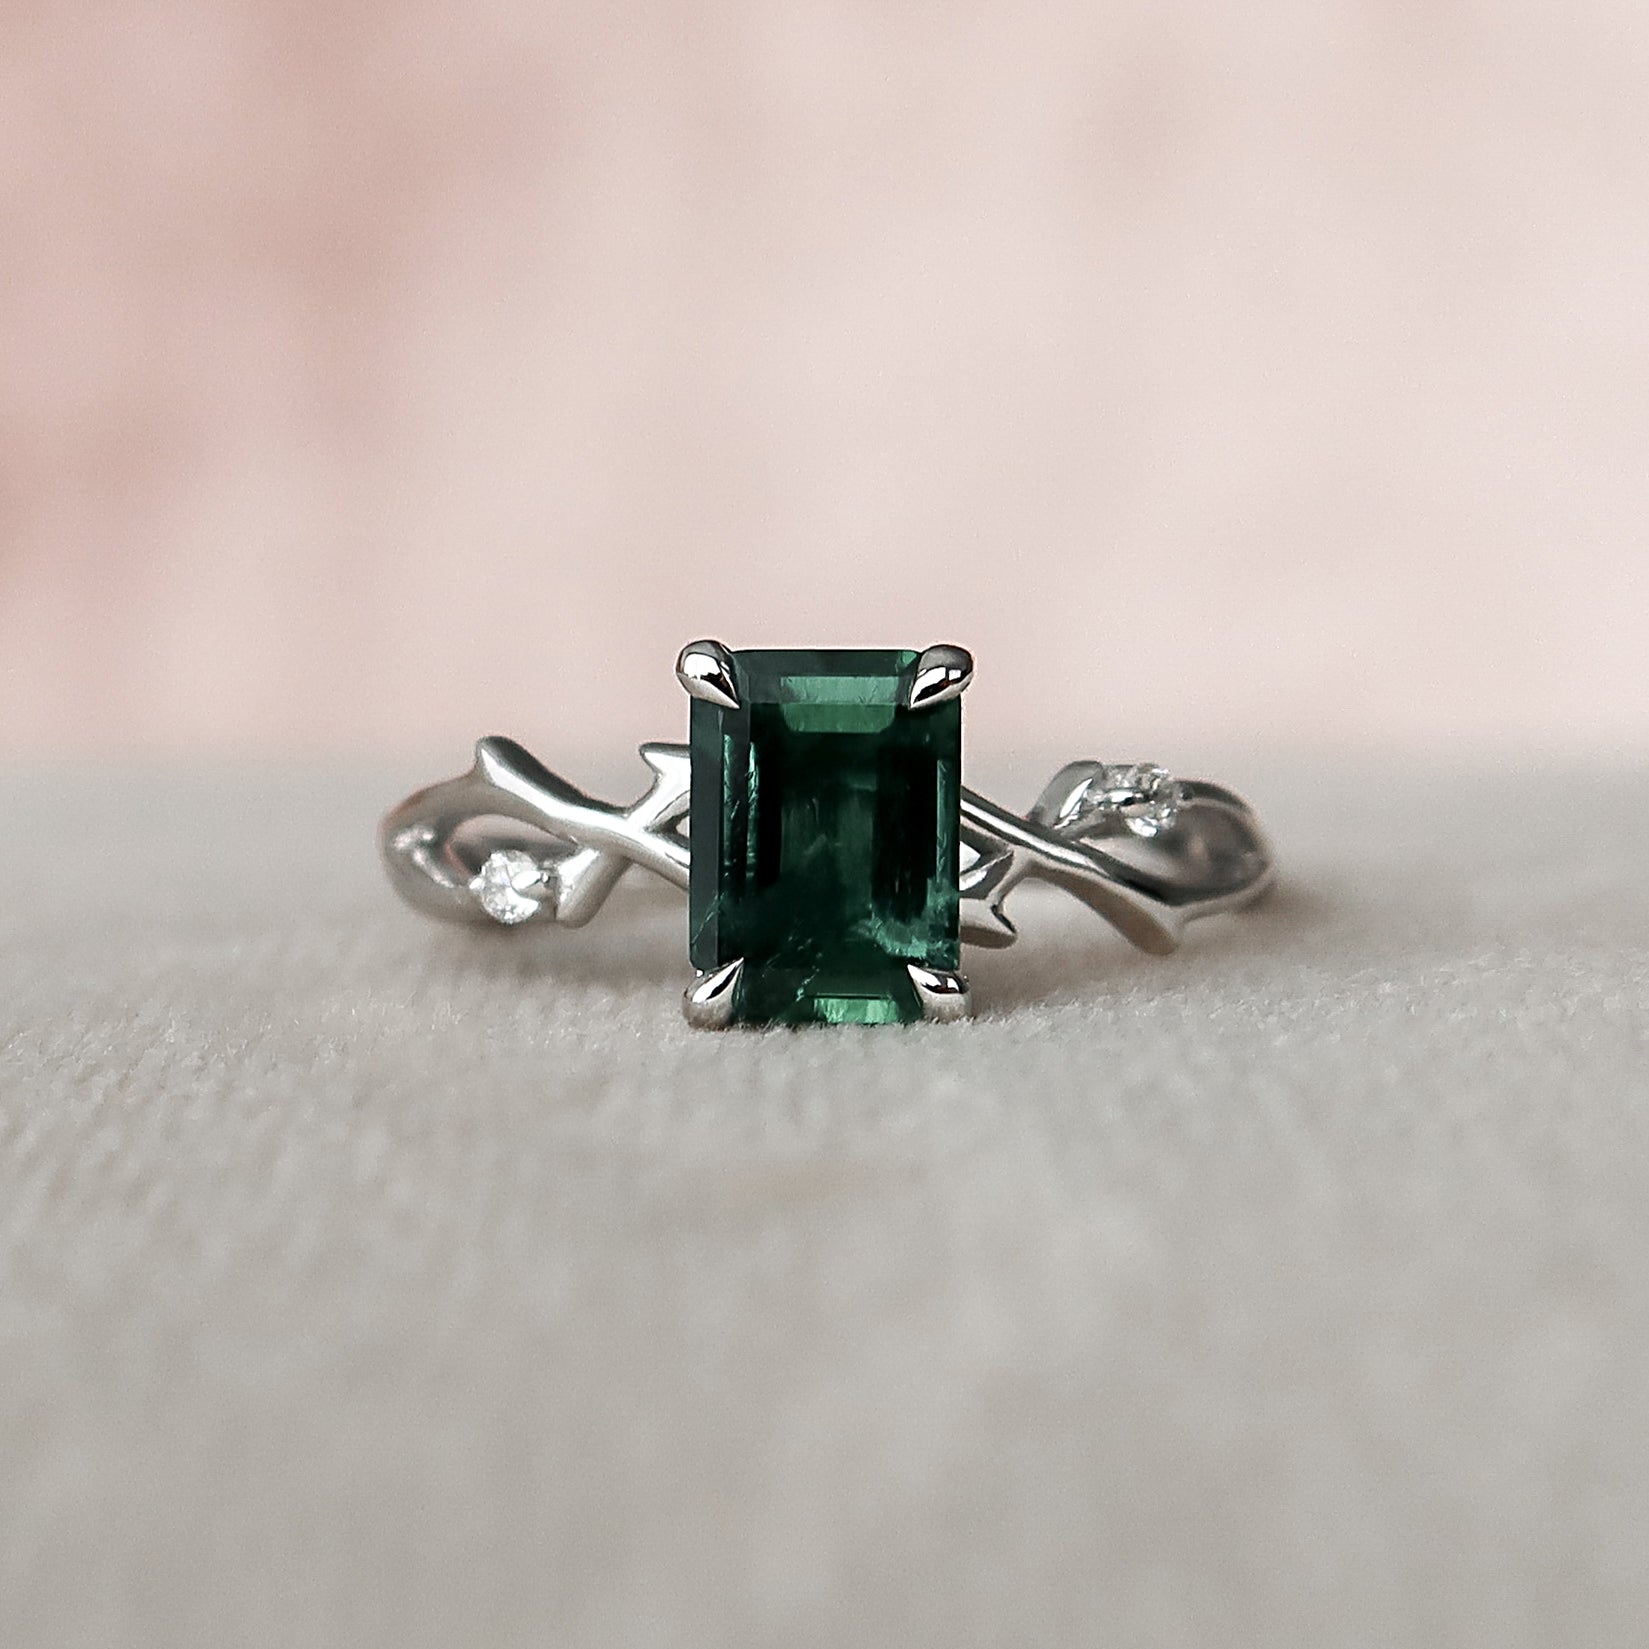 Gemstone Engagement Rings: Reasons for Popularity | One2Three Jewelry